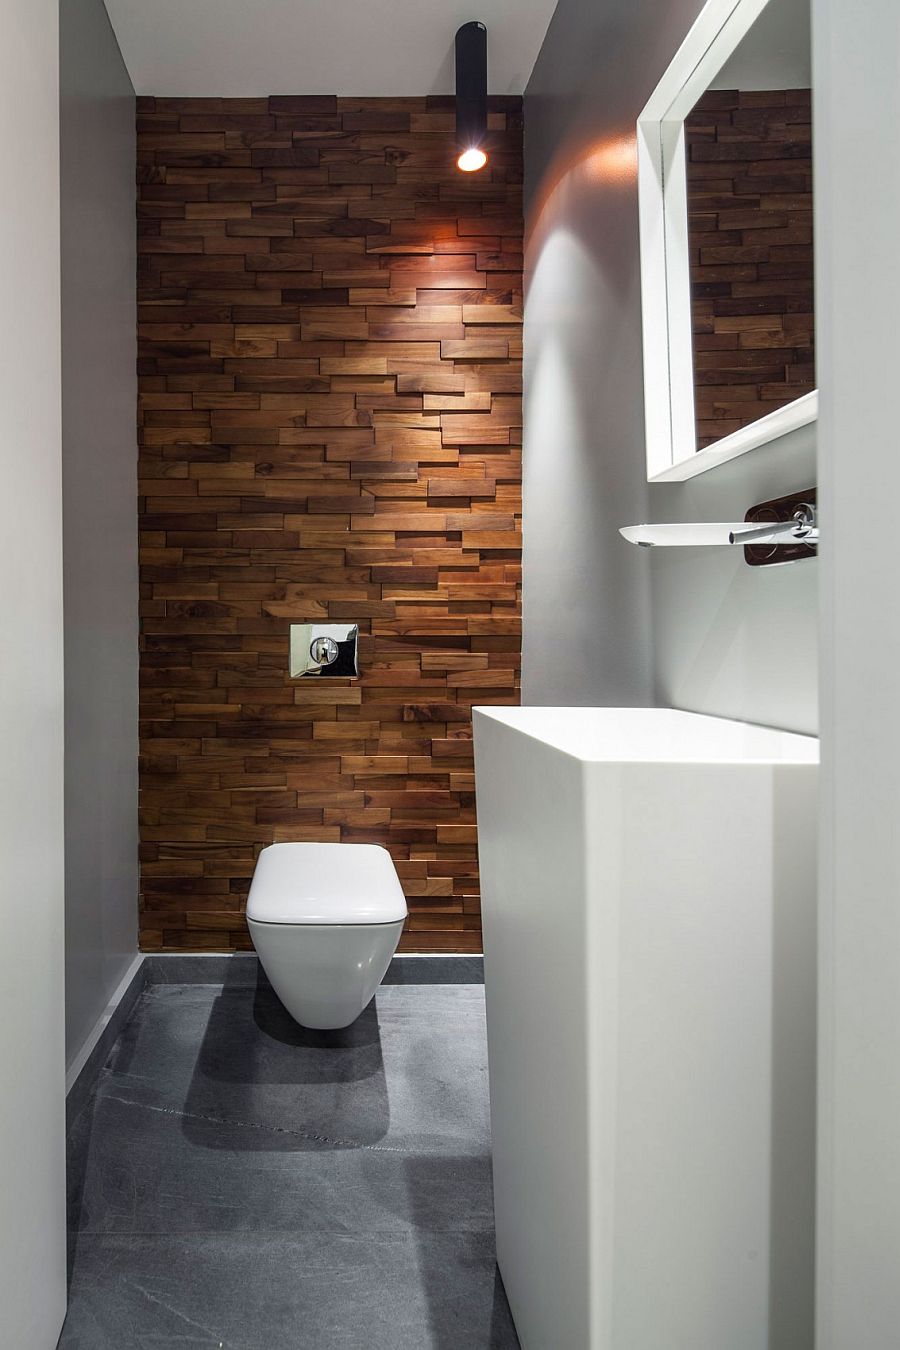 Textured wooden accent feature inside the small bathroom